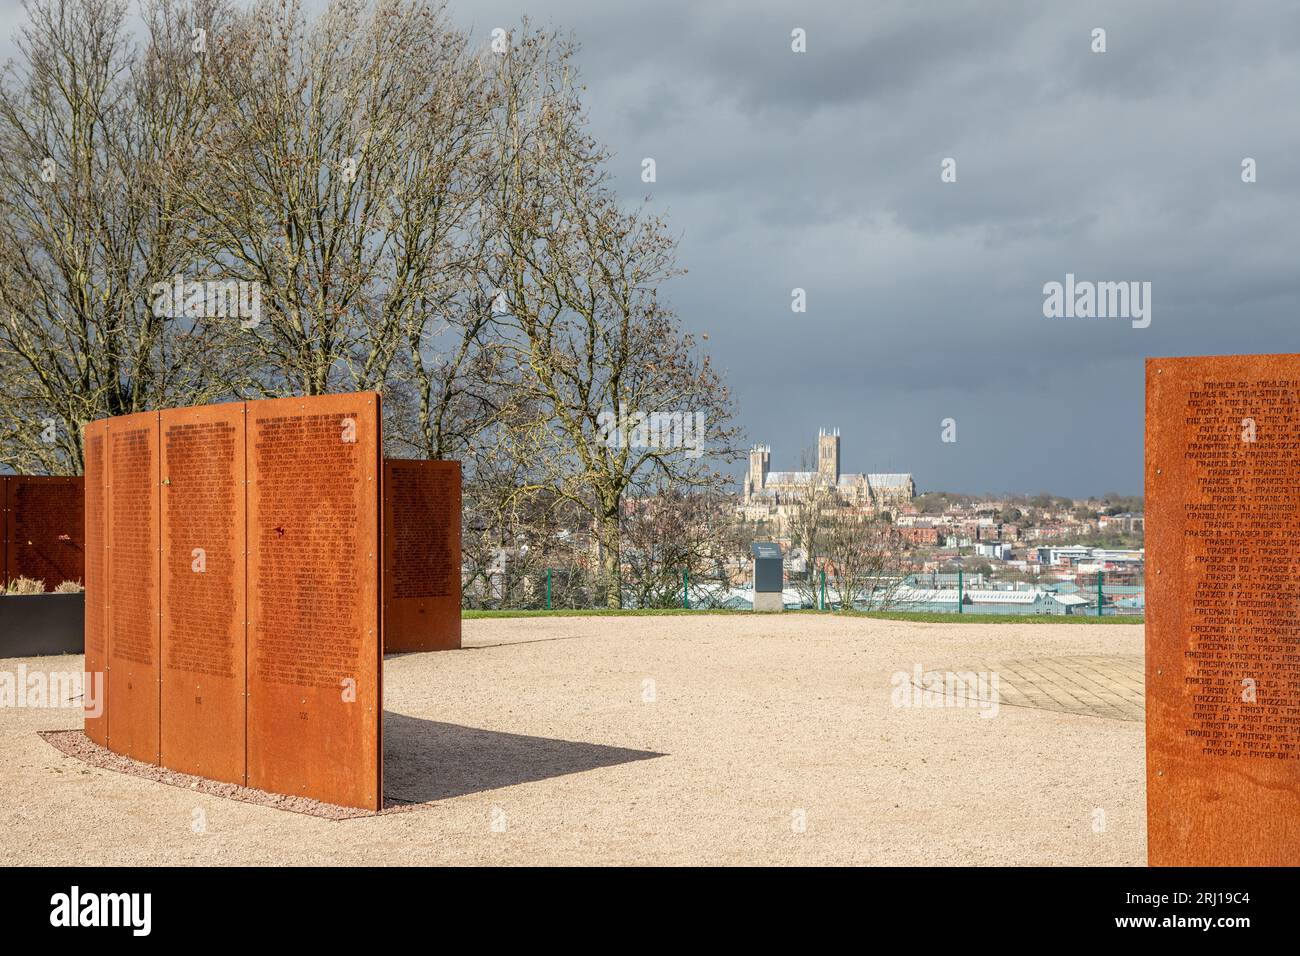 Cathedral and Memorial Wall, IBCC, Lincoln, Lincolnshire, England, UK Stockfoto